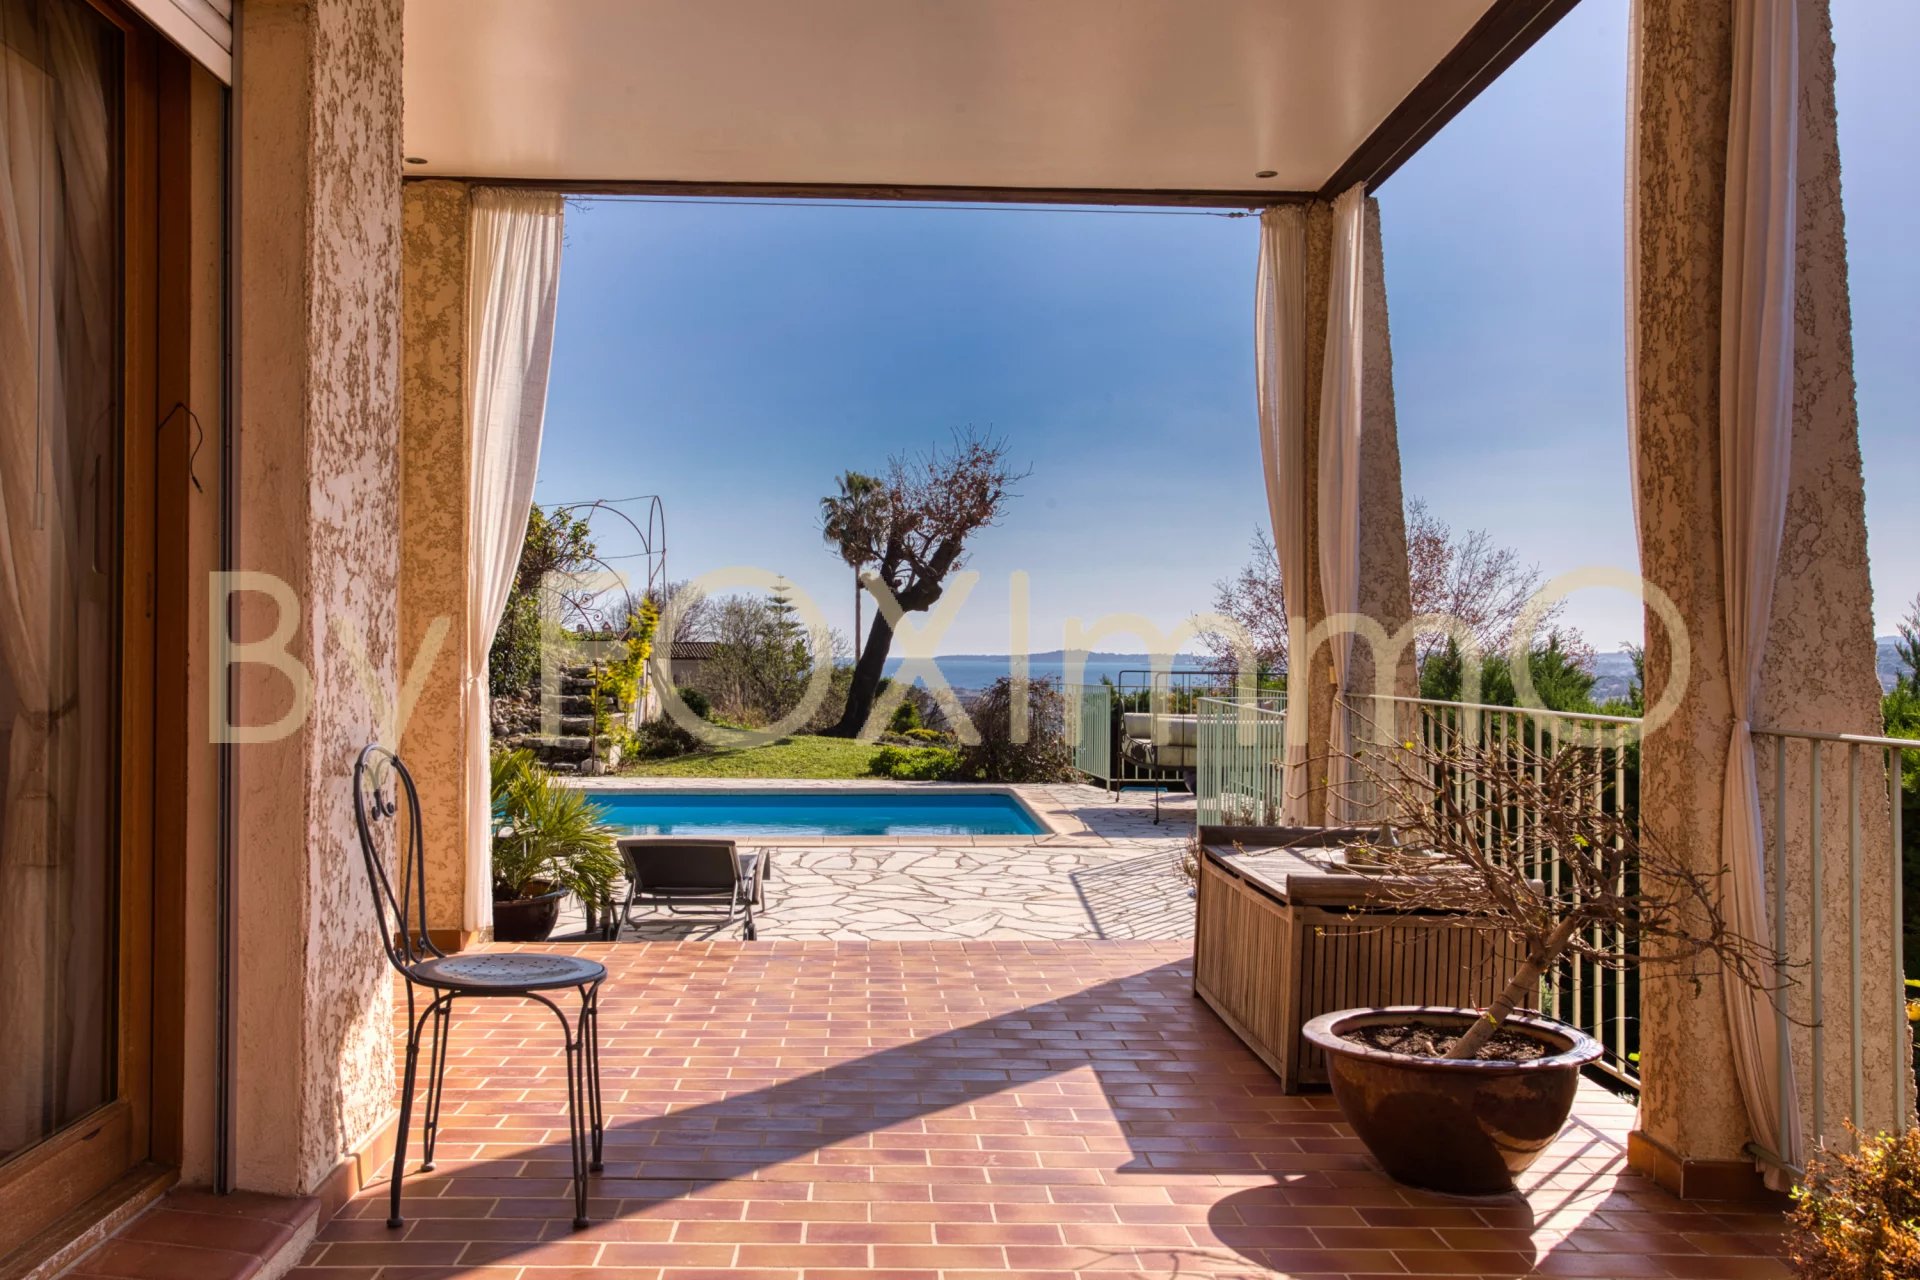 Luxury villa with swimming pool and panoramic sea view. French Riviera - Cagnes sur Mer